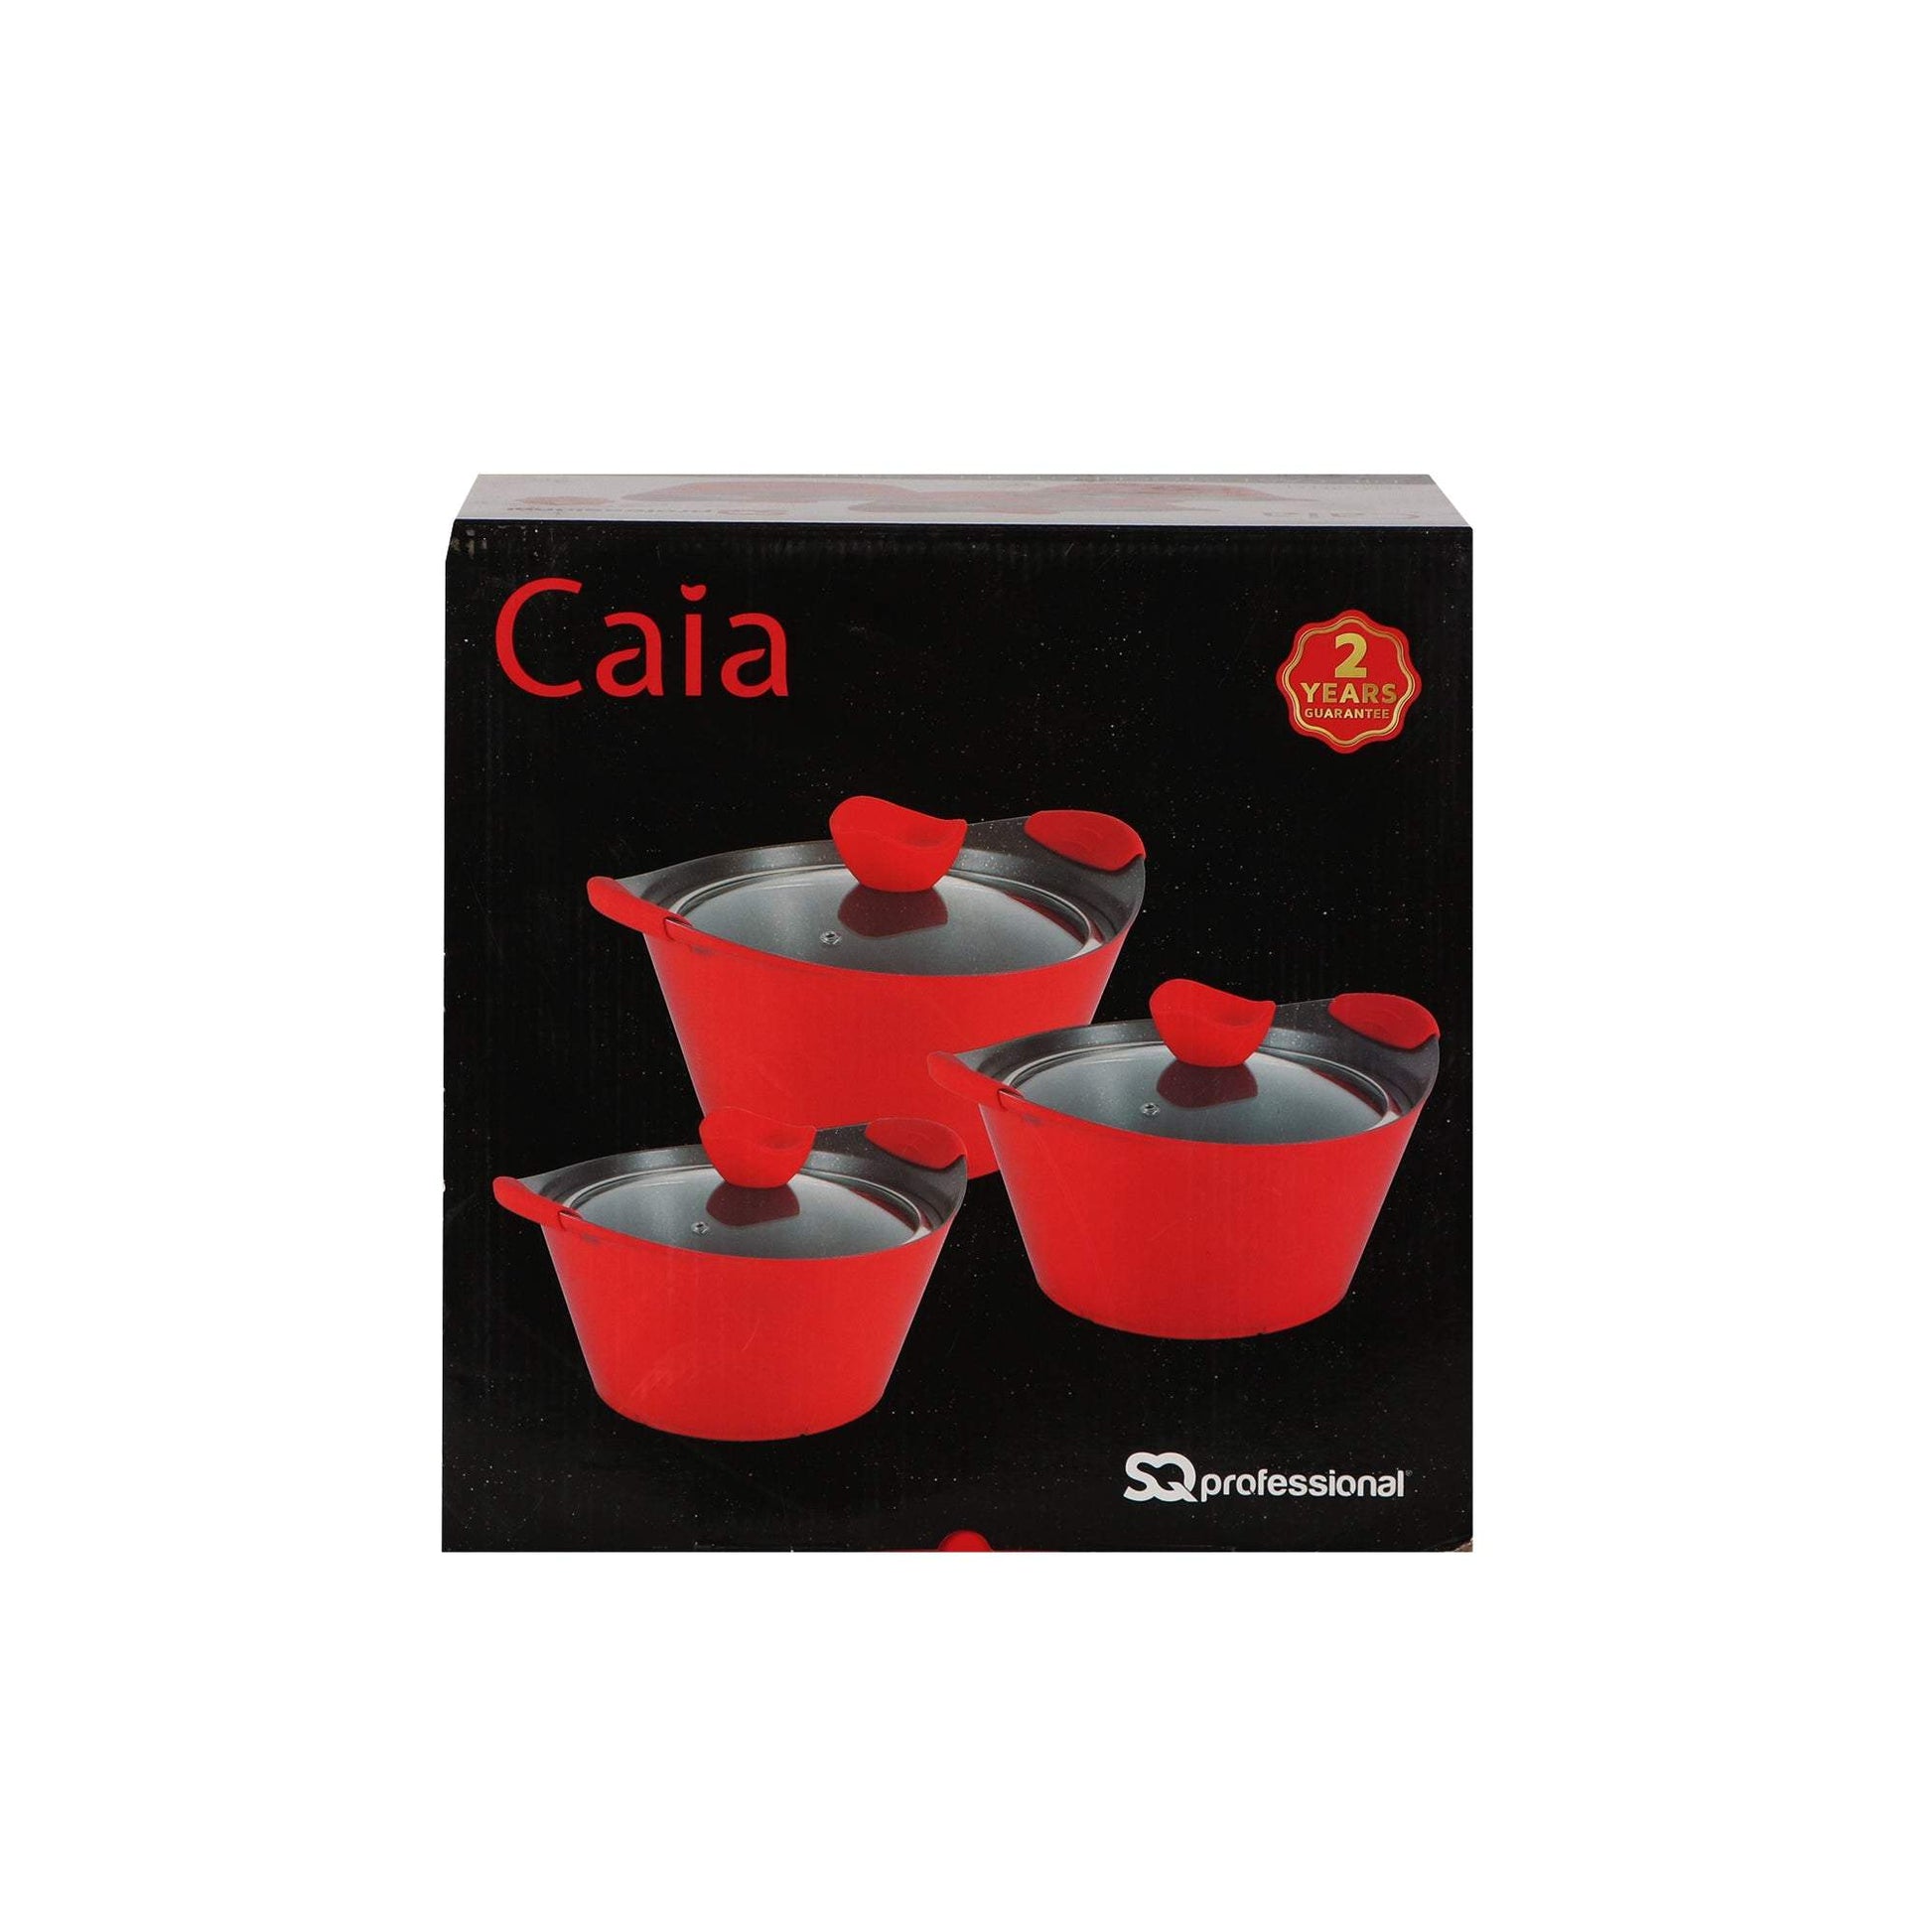 Caia 3pc Die-cast Non-stick Marble Coated Stockpot Set with Glass Lids-Royal Brands Co-